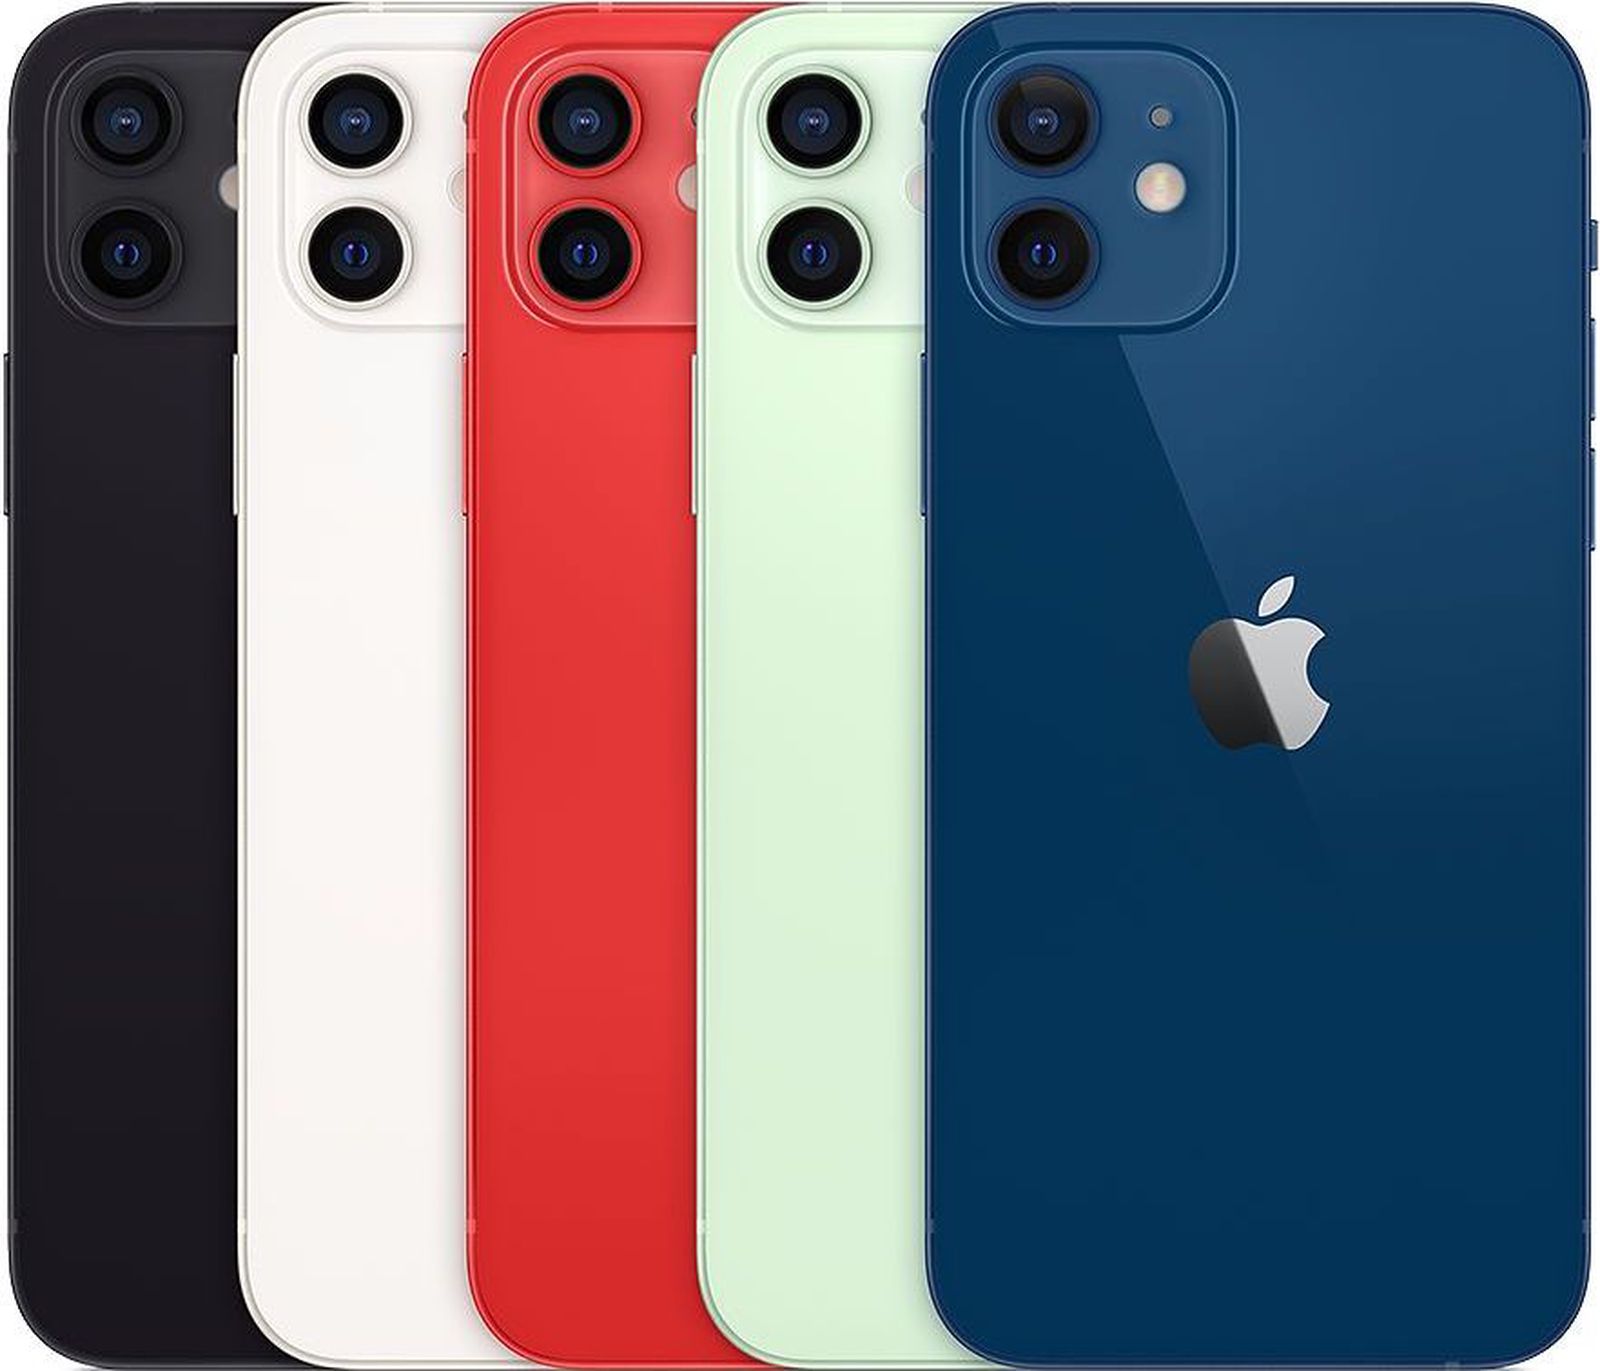 iPhone 12 Colors: Deciding on The Right Color - MacRumors